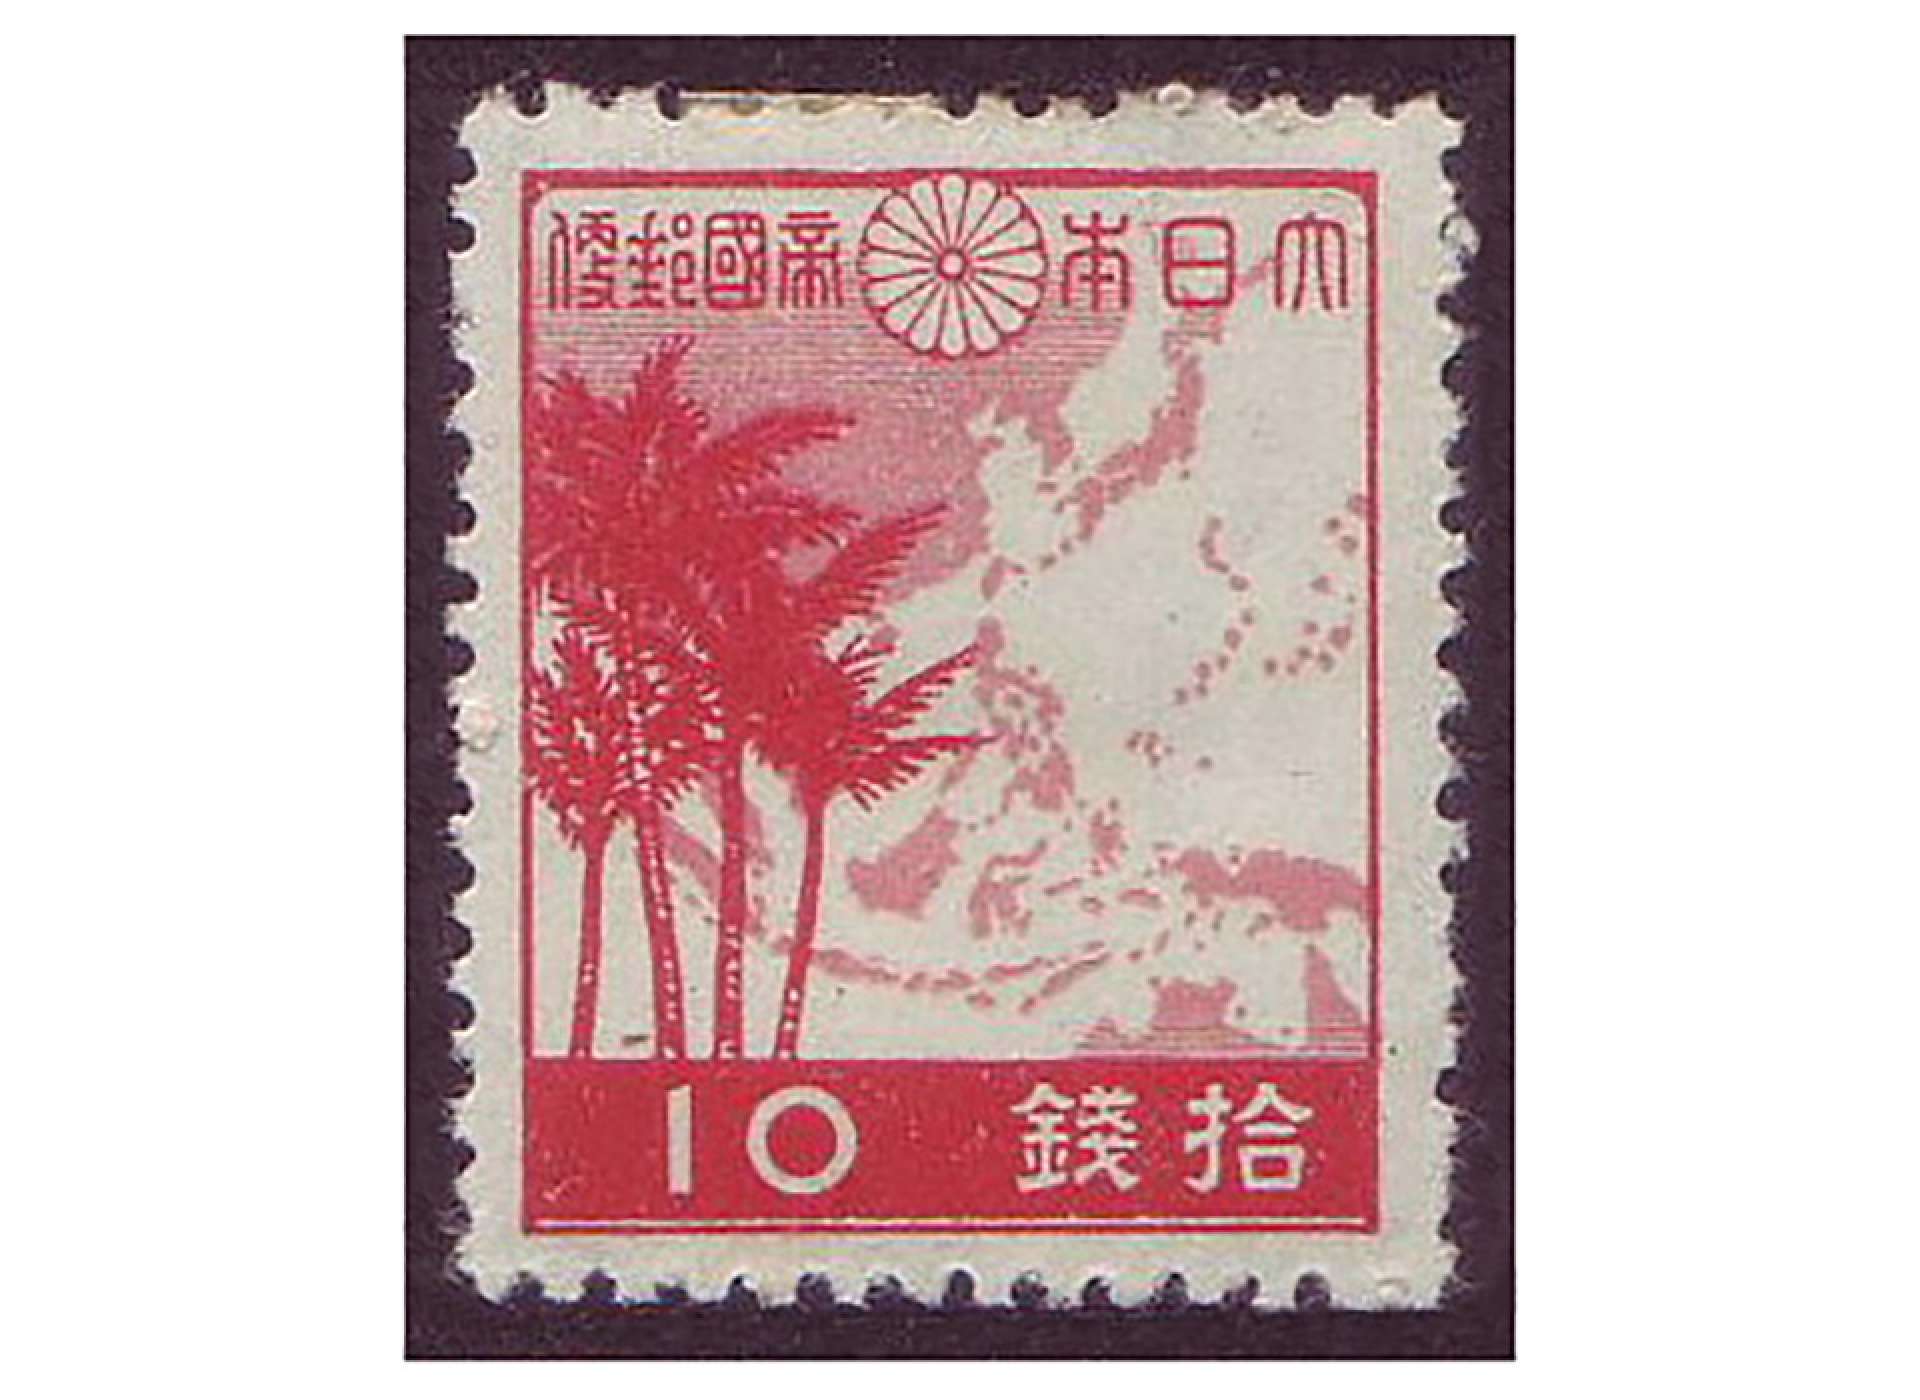 Greater East Asia Co-Prosperity Sphere stamp